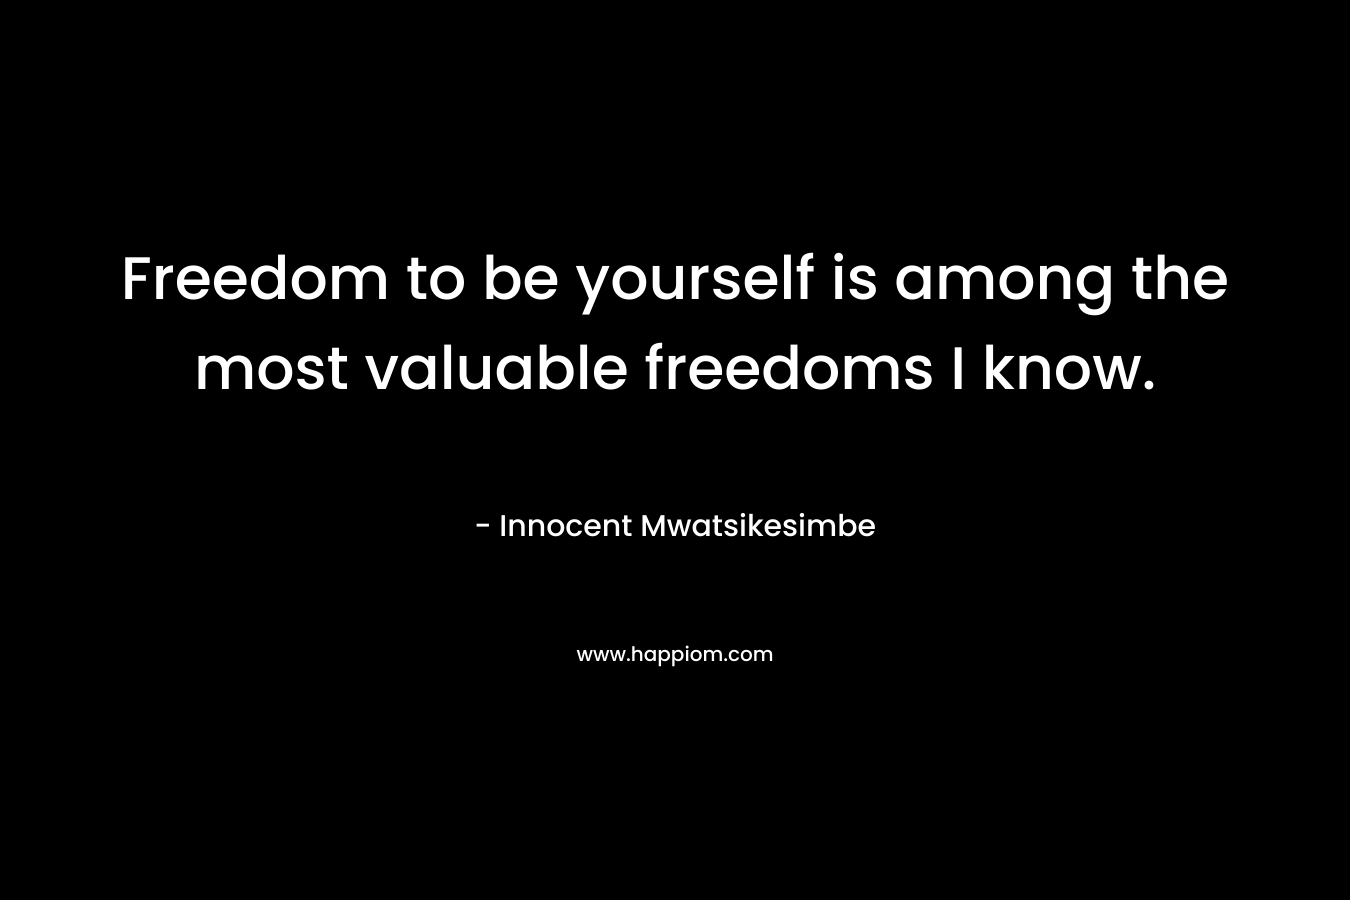 Freedom to be yourself is among the most valuable freedoms I know.